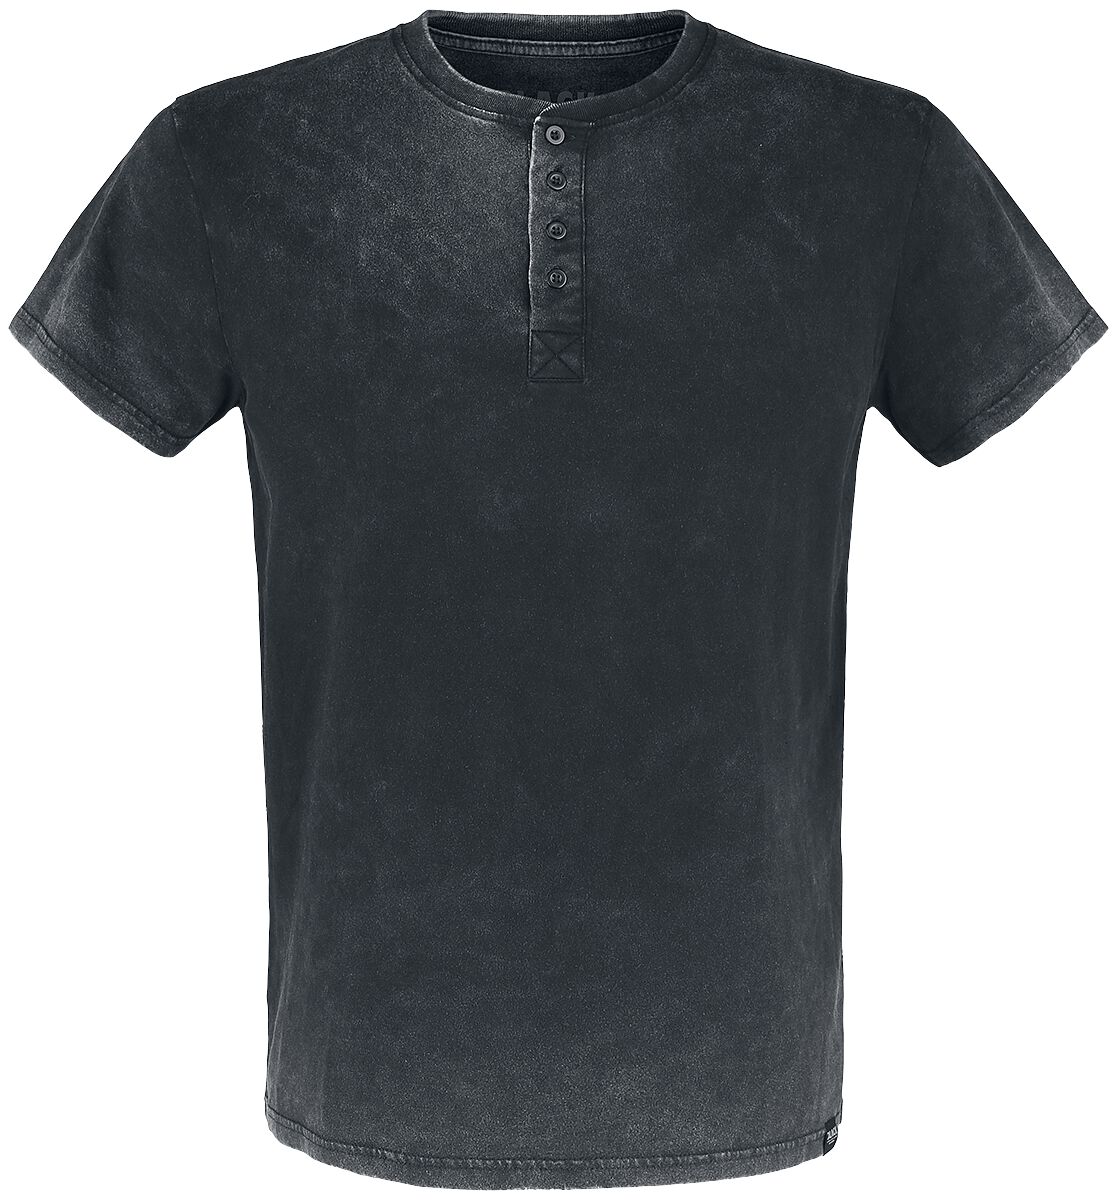 Image of T-Shirt di Black Premium by EMP - T-Shirt with Wash and Button Placket - S a 5XL - Uomo - verde oliva